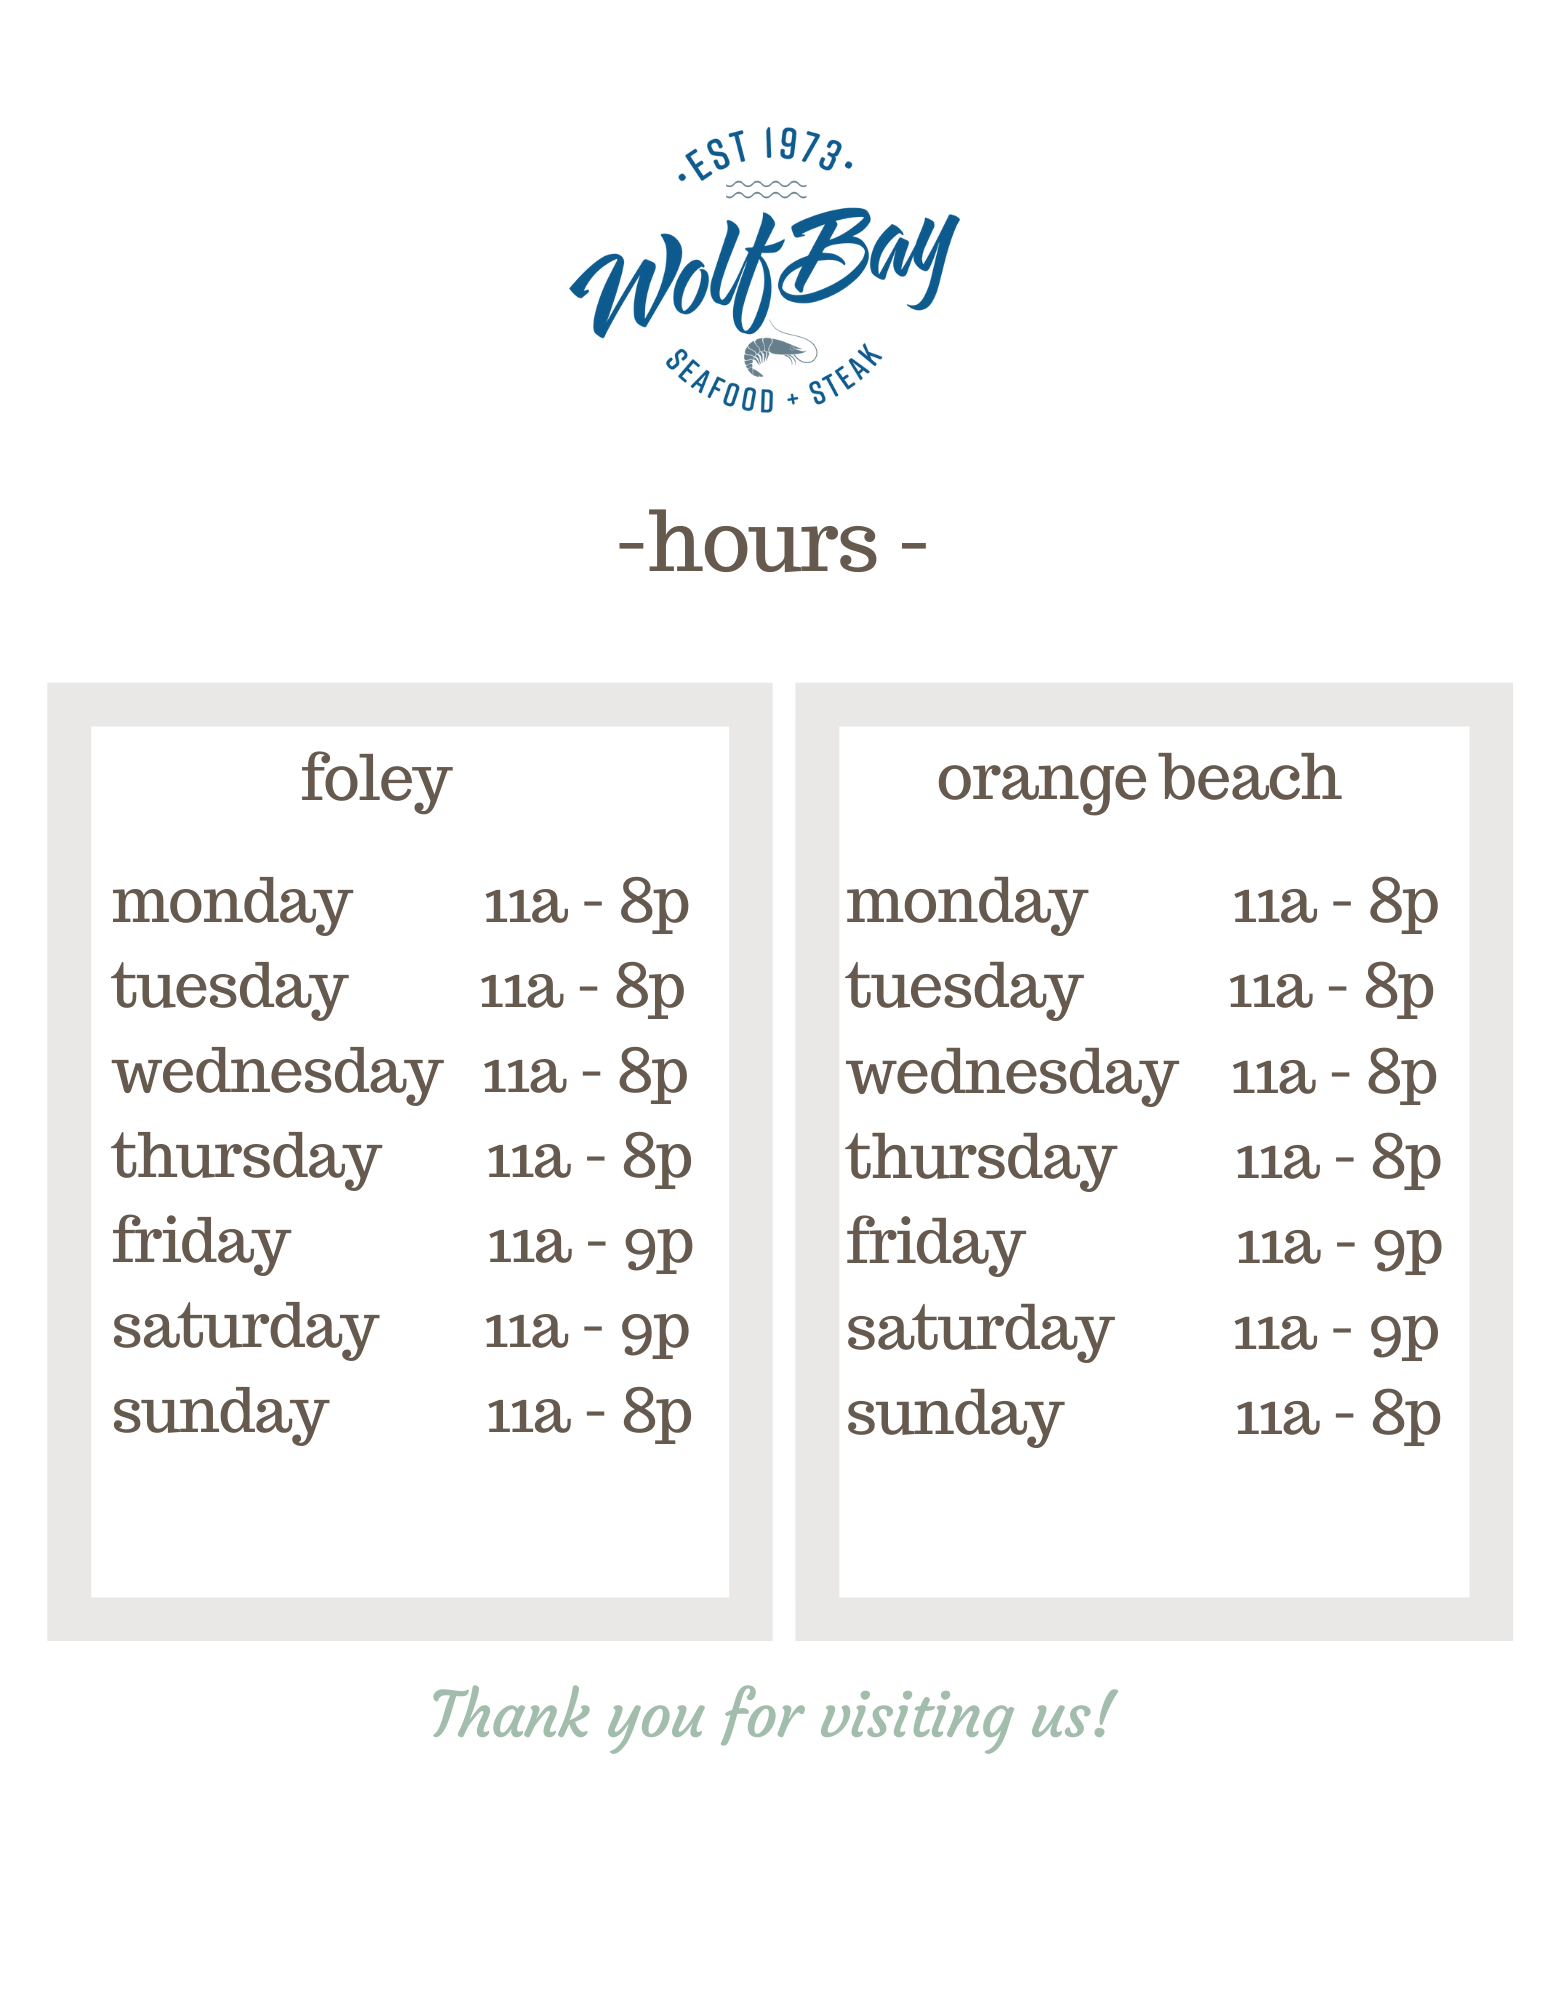 Fall / Winter Hours at Wolf Bay